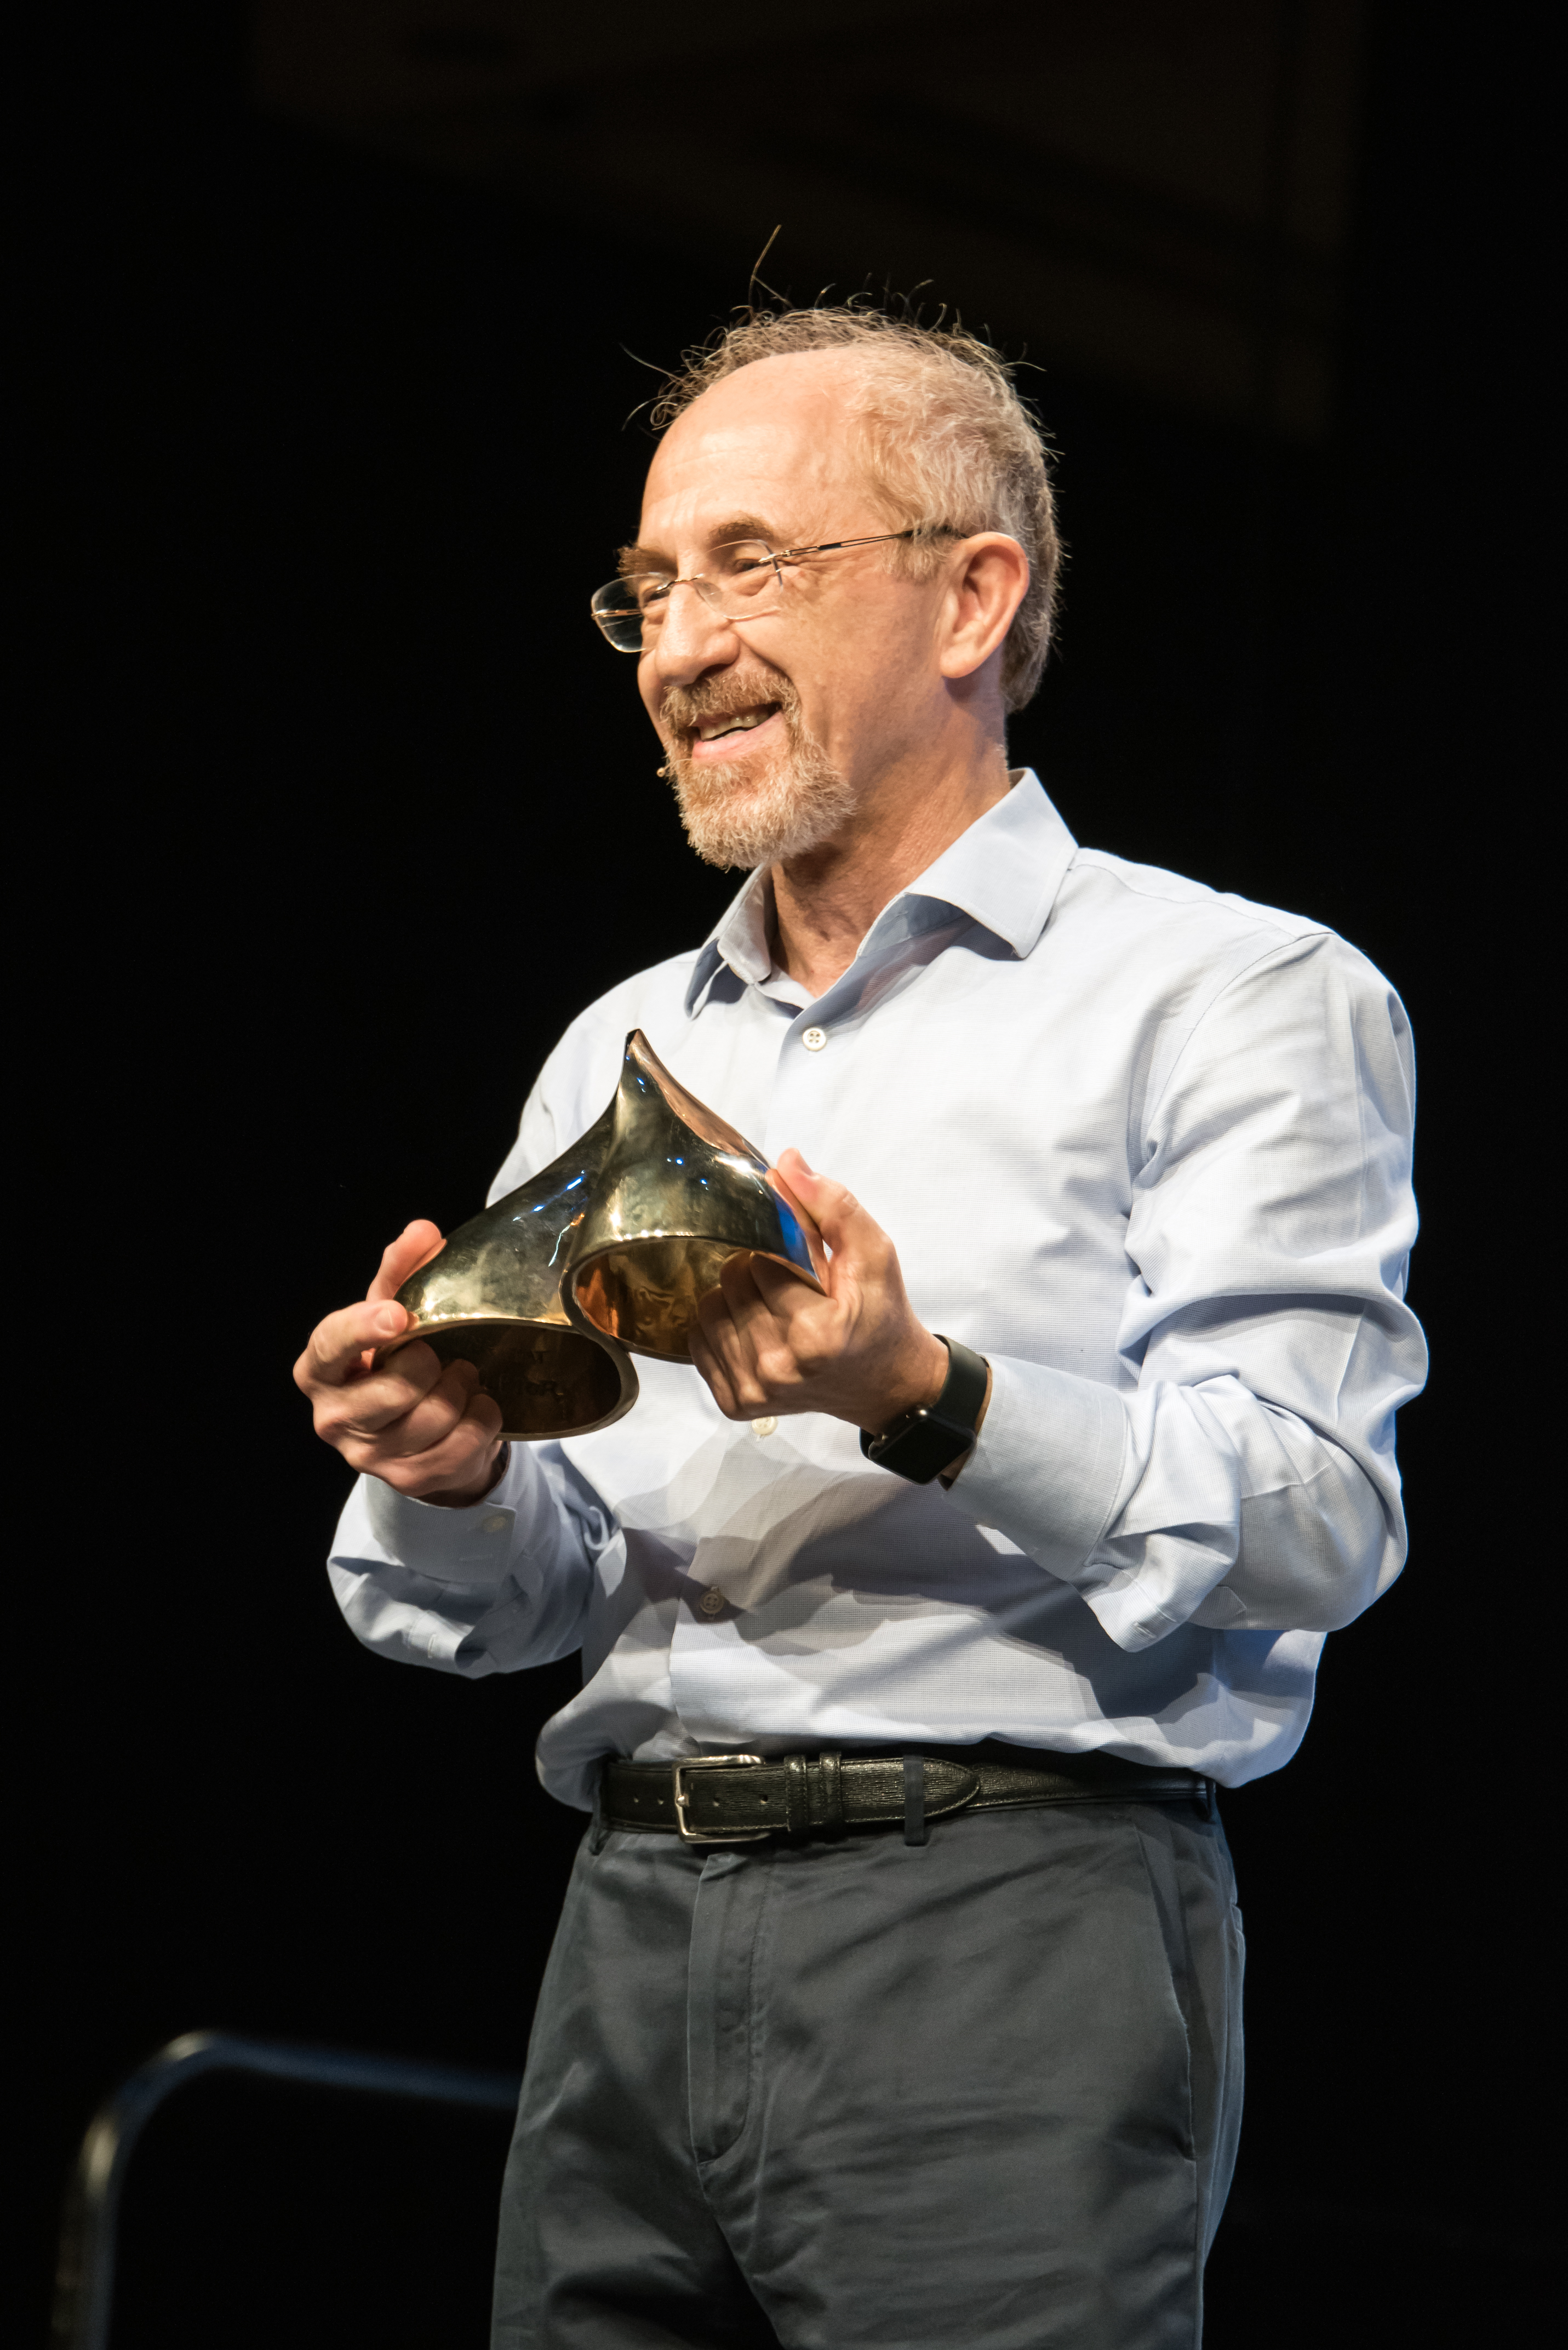 Professor Henry Fuchs holding the Coons Award at SIGGRAPH 2015